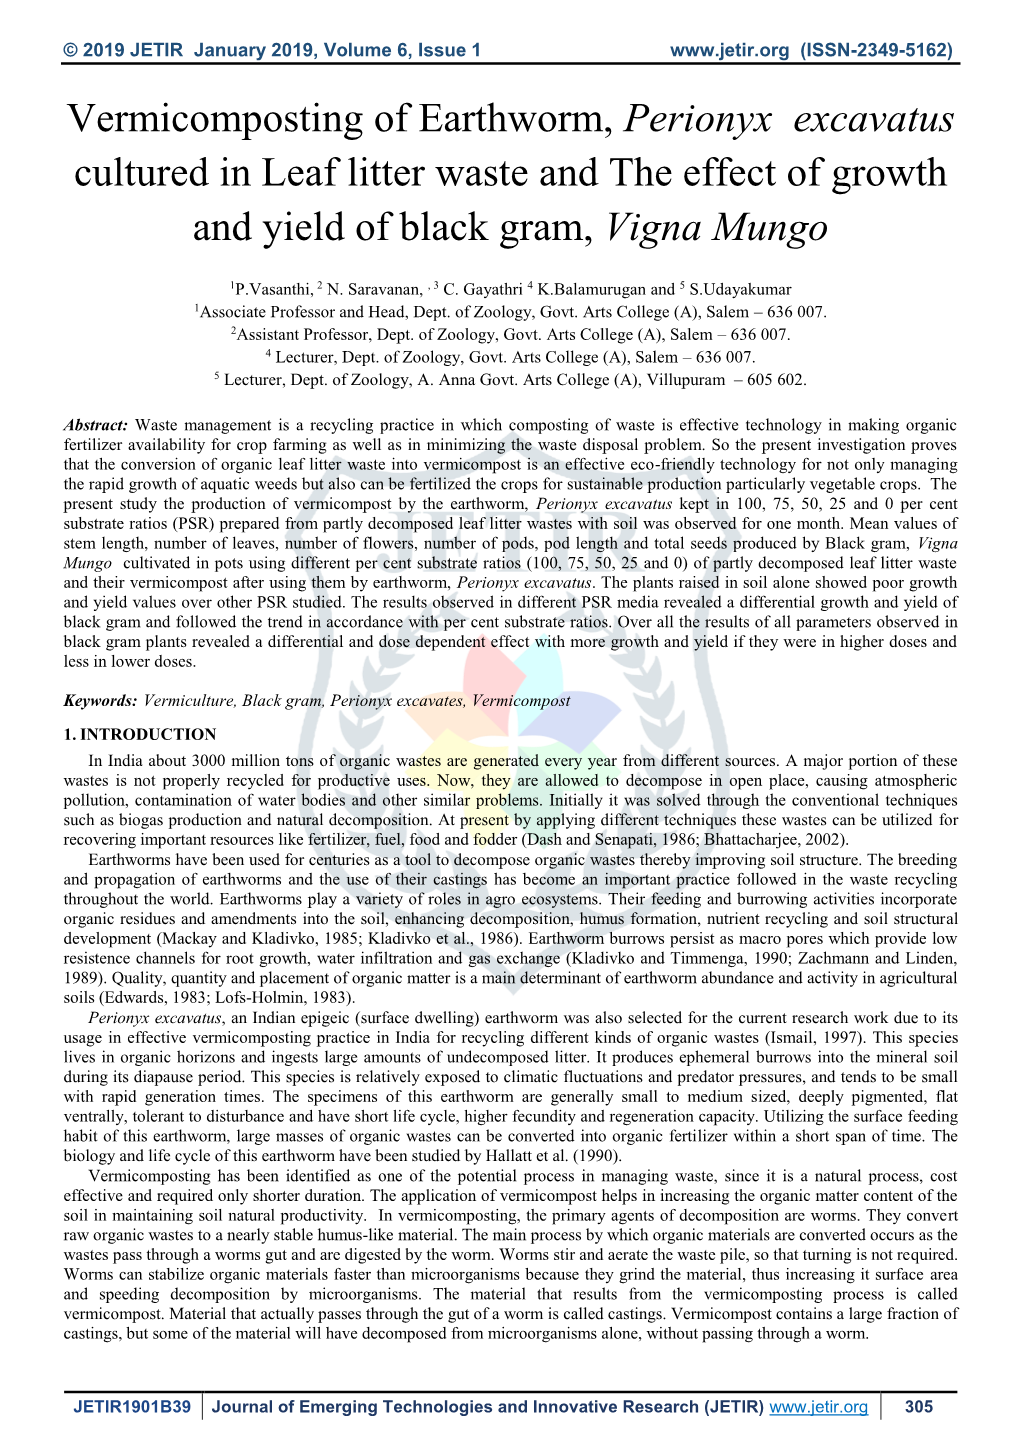 Perionyx Excavatus Cultured in Leaf Litter Waste and the Effect of Growth and Yield of Black Gram, Vigna Mungo